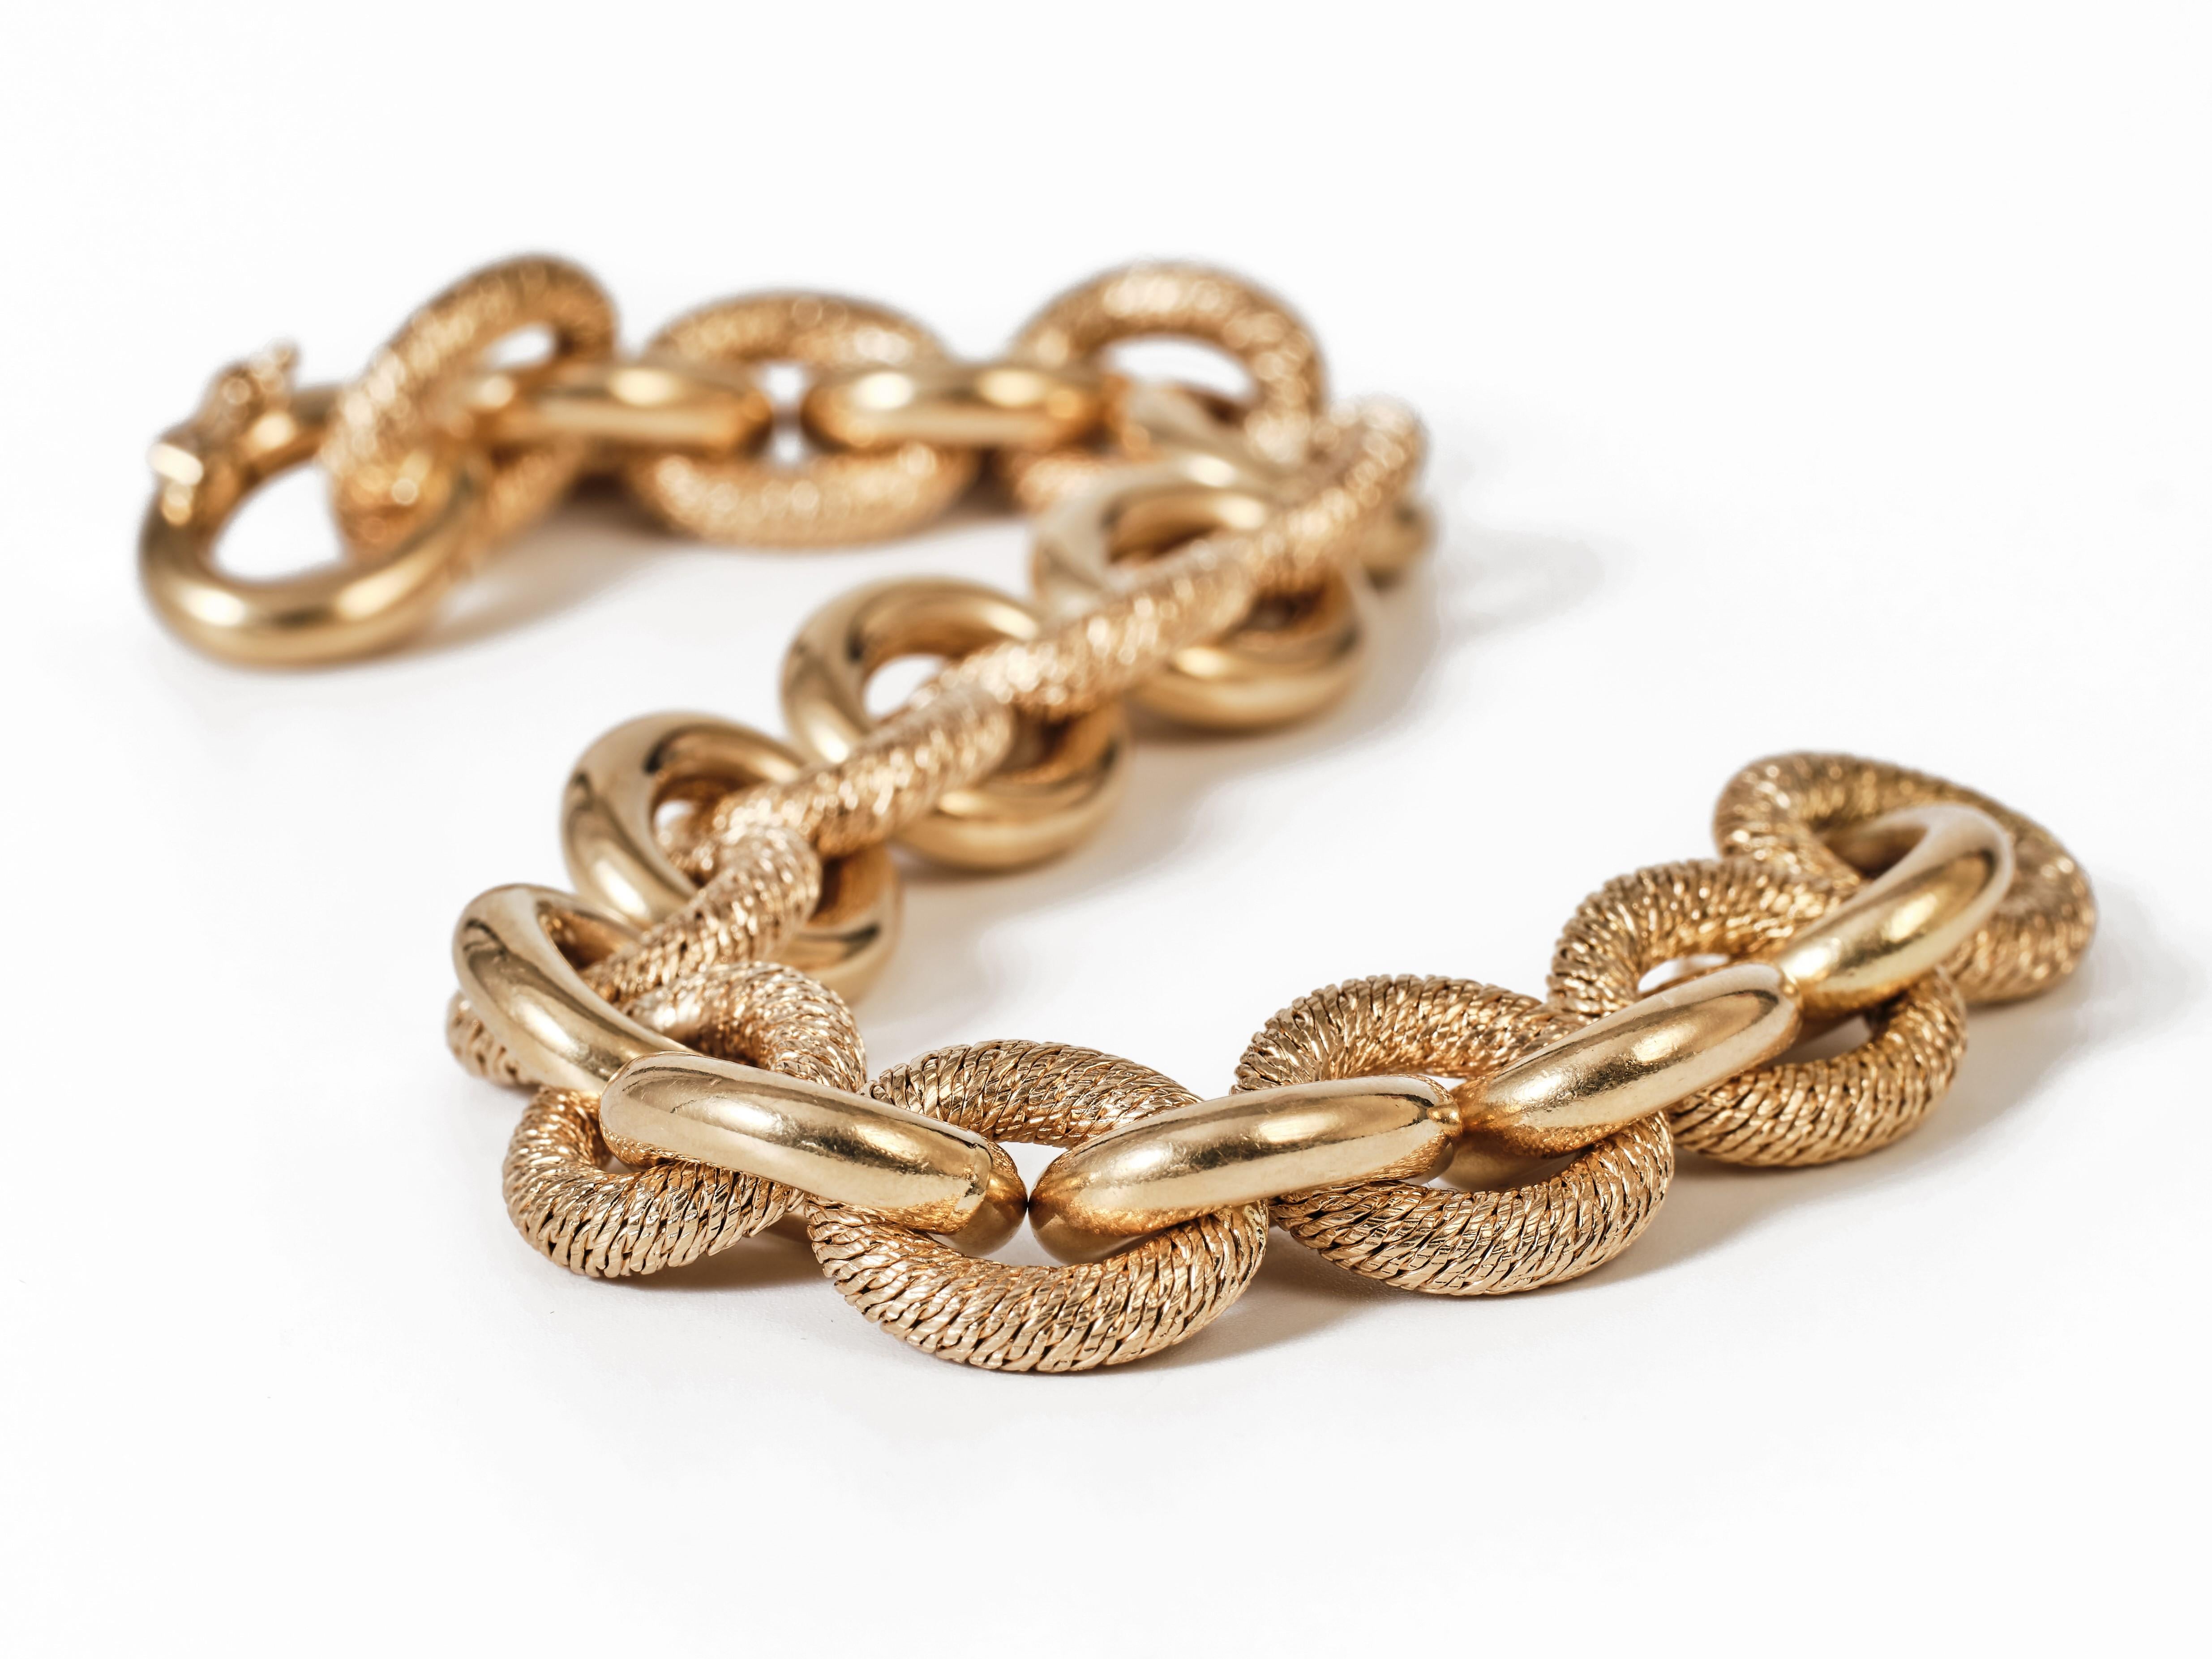 From France’s most revered goldsmith.

The intricately woven links of a Georges L’Enfant bracelet are recognizable at once. The highly skilled gold master spun art from gold, creating textured patterns that remain a L’Enfant signature today. A